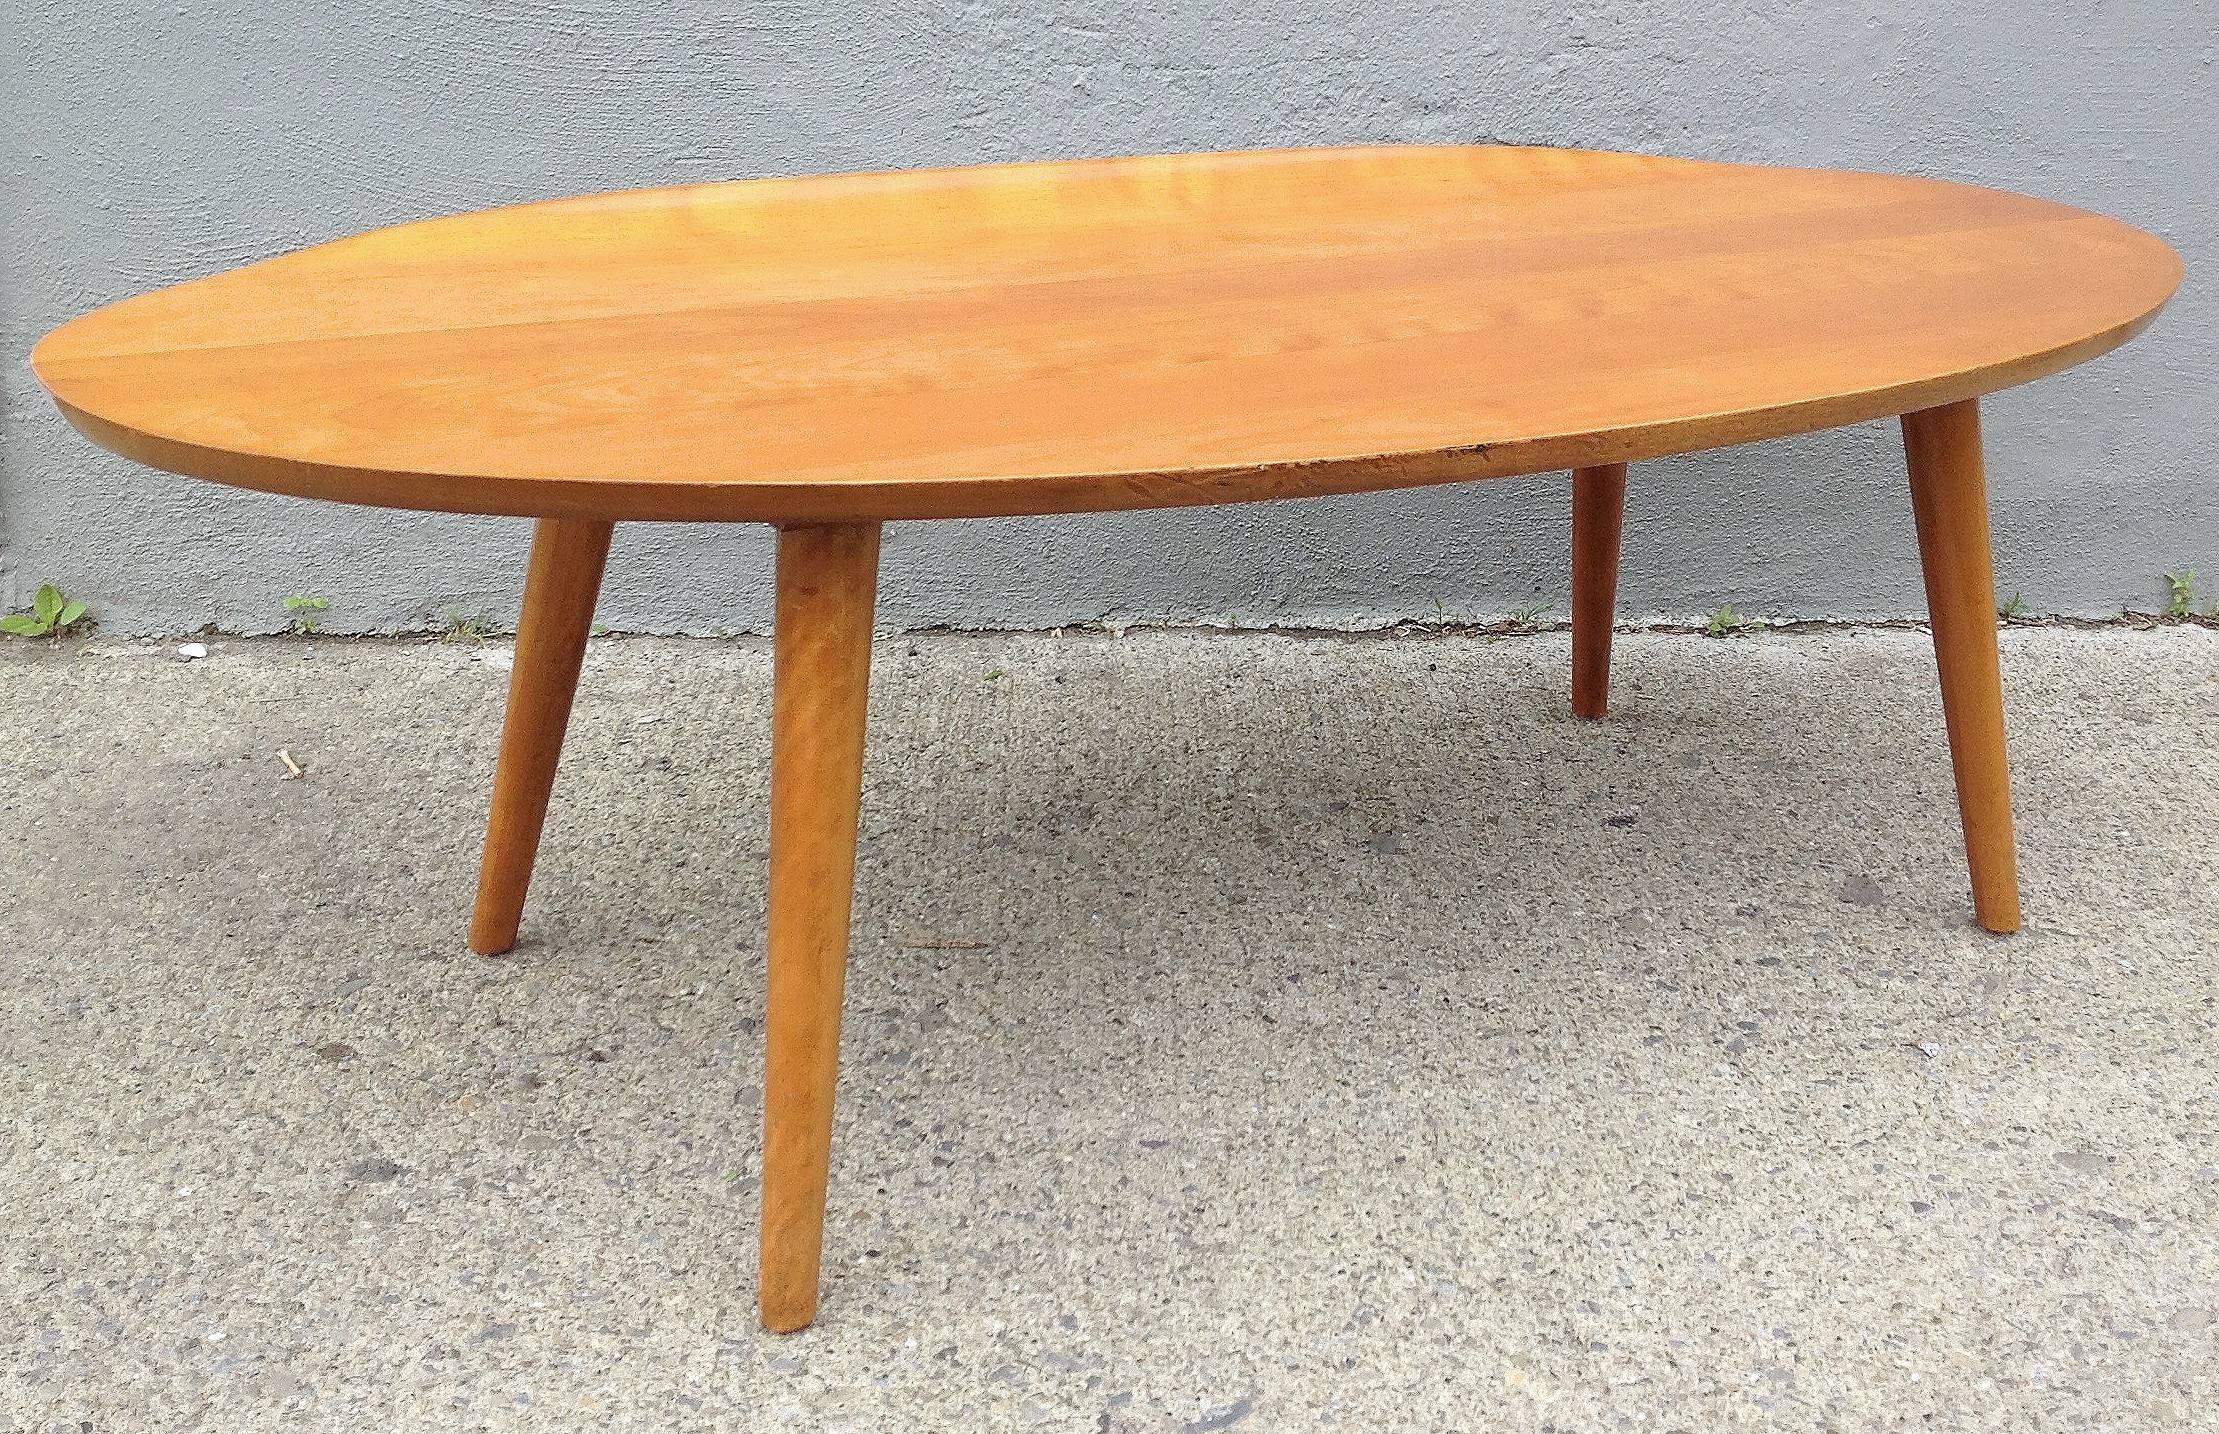 Russel Wright Elliptical Coffee Table with Curled Edge In Excellent Condition For Sale In Hudson, NY